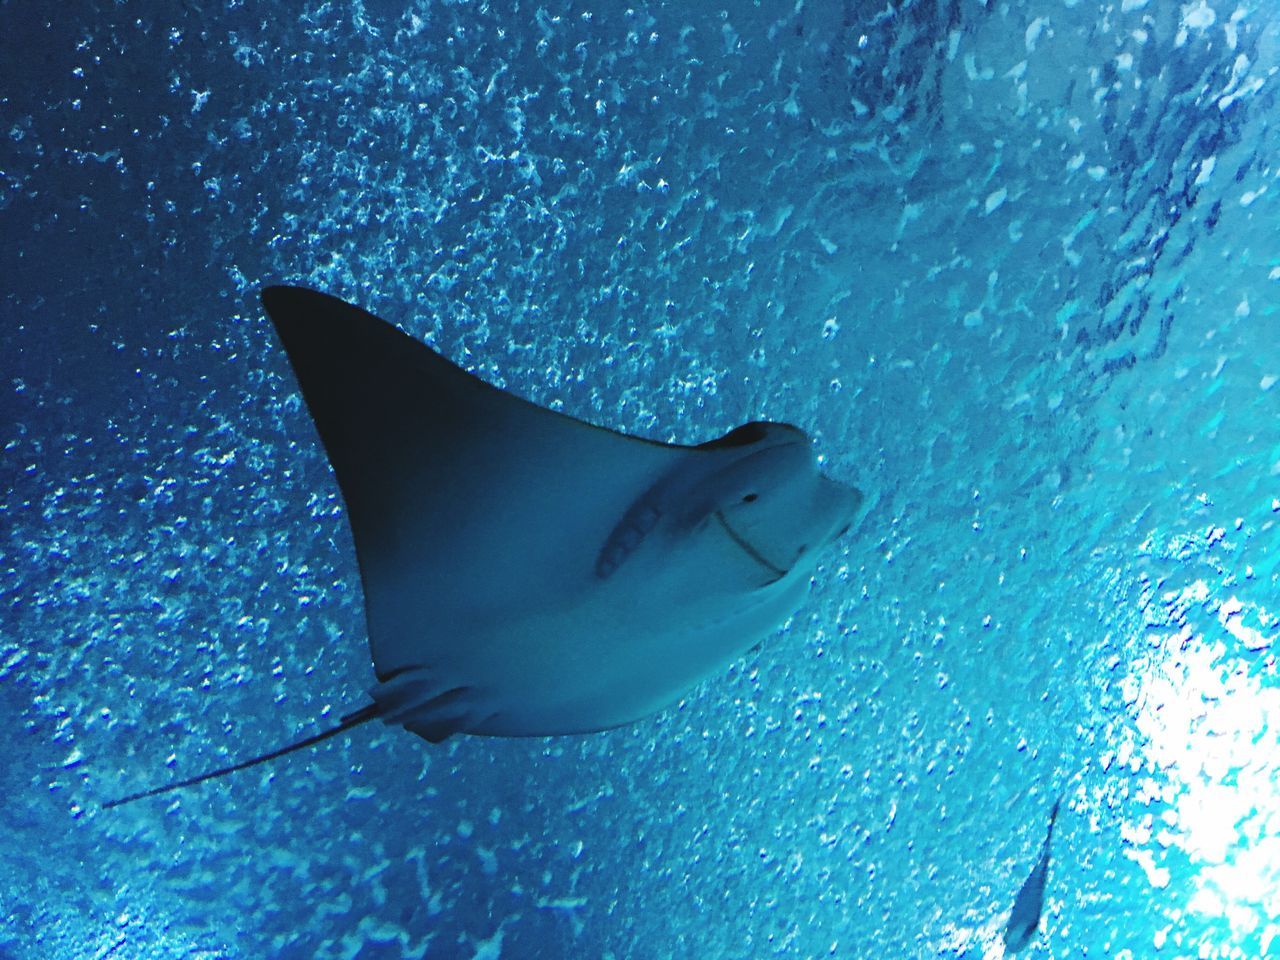 blue, one animal, animals in the wild, animal themes, sea, undersea, sea life, animal wildlife, swimming, nature, underwater, no people, beauty in nature, dolphin, close-up, stingray, water, outdoors, day